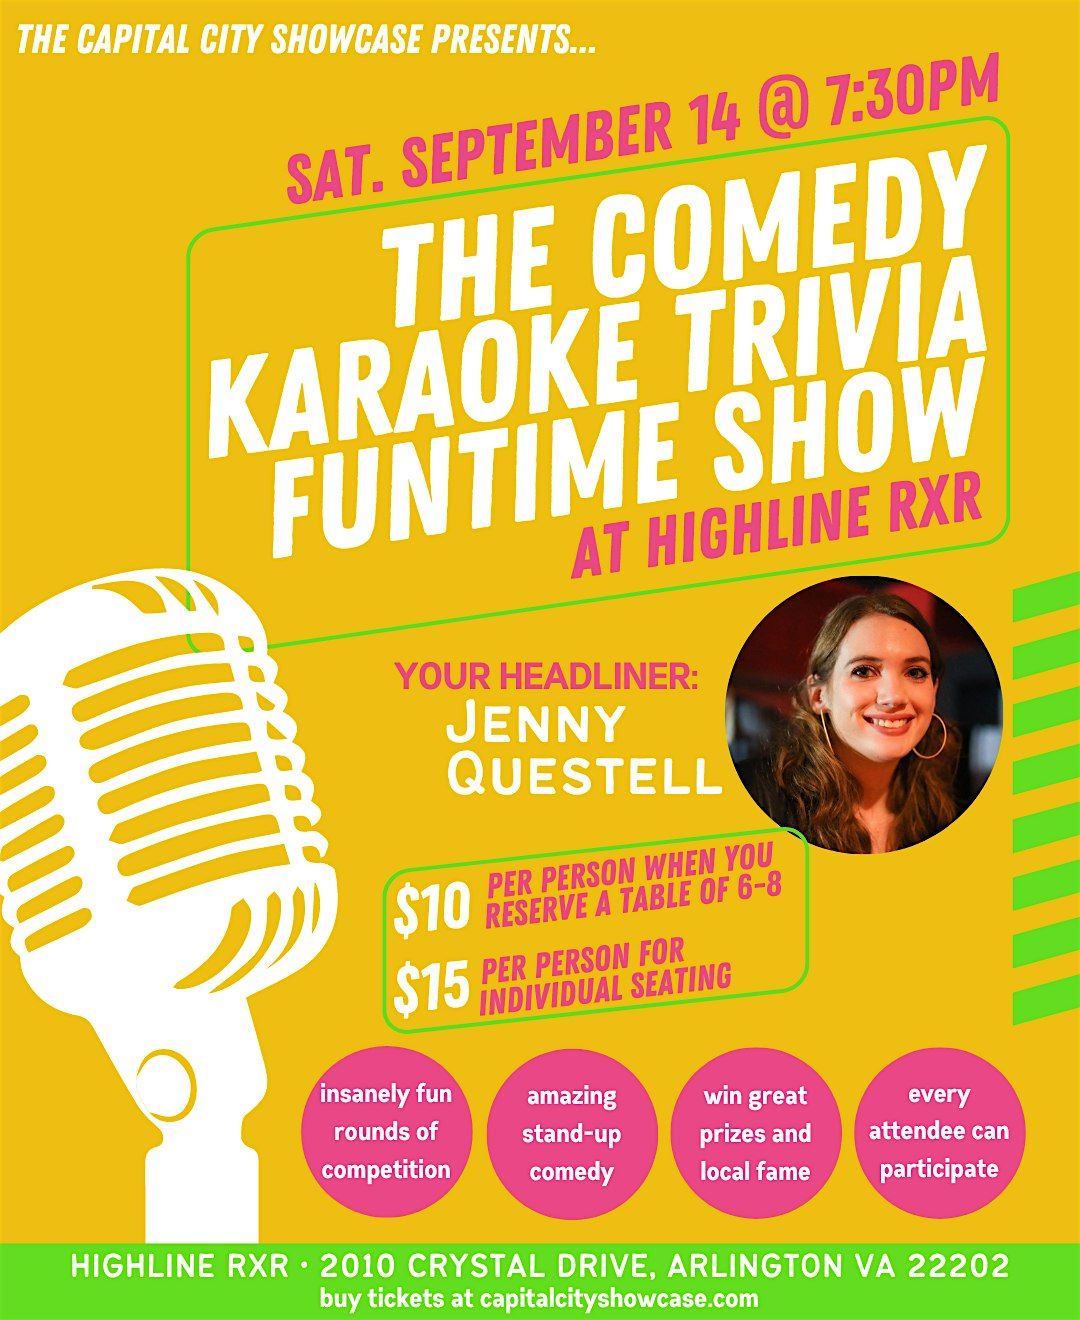 The Comedy Karaoke Trivia Funtime Show with Jenny Questell